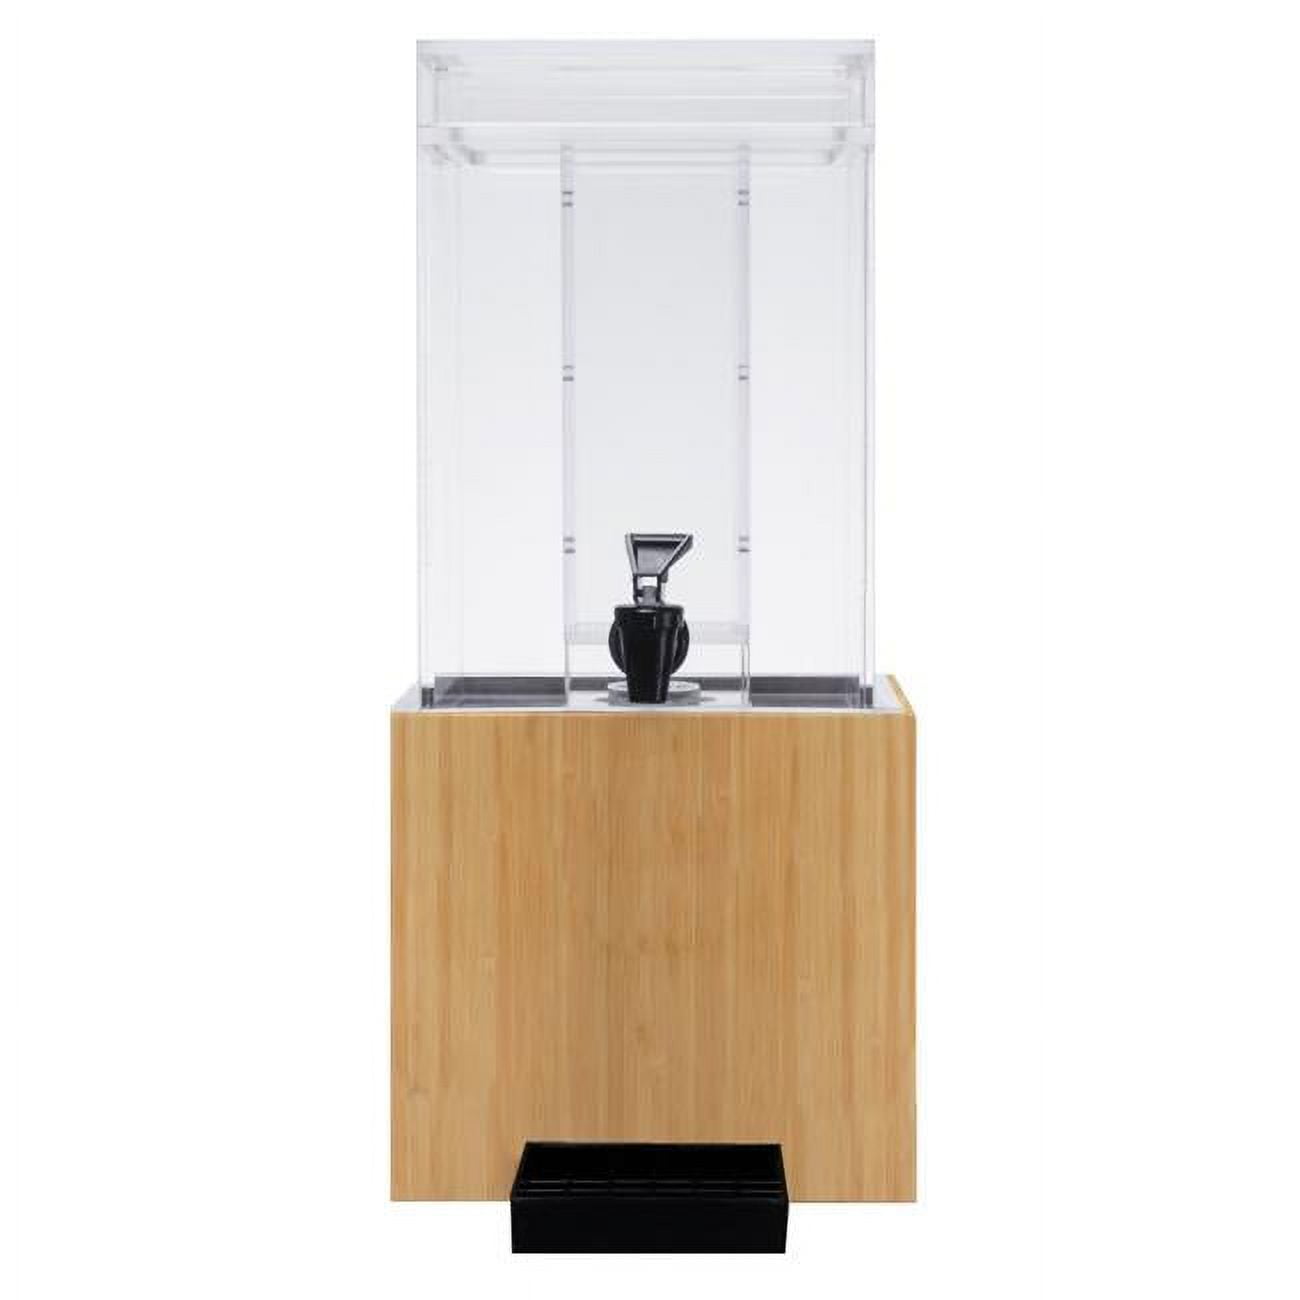 1527-1inf-60 1.5 Gal Bamboo Infusion Dispenser - 8.125 X 9.75 X 17.75 In.